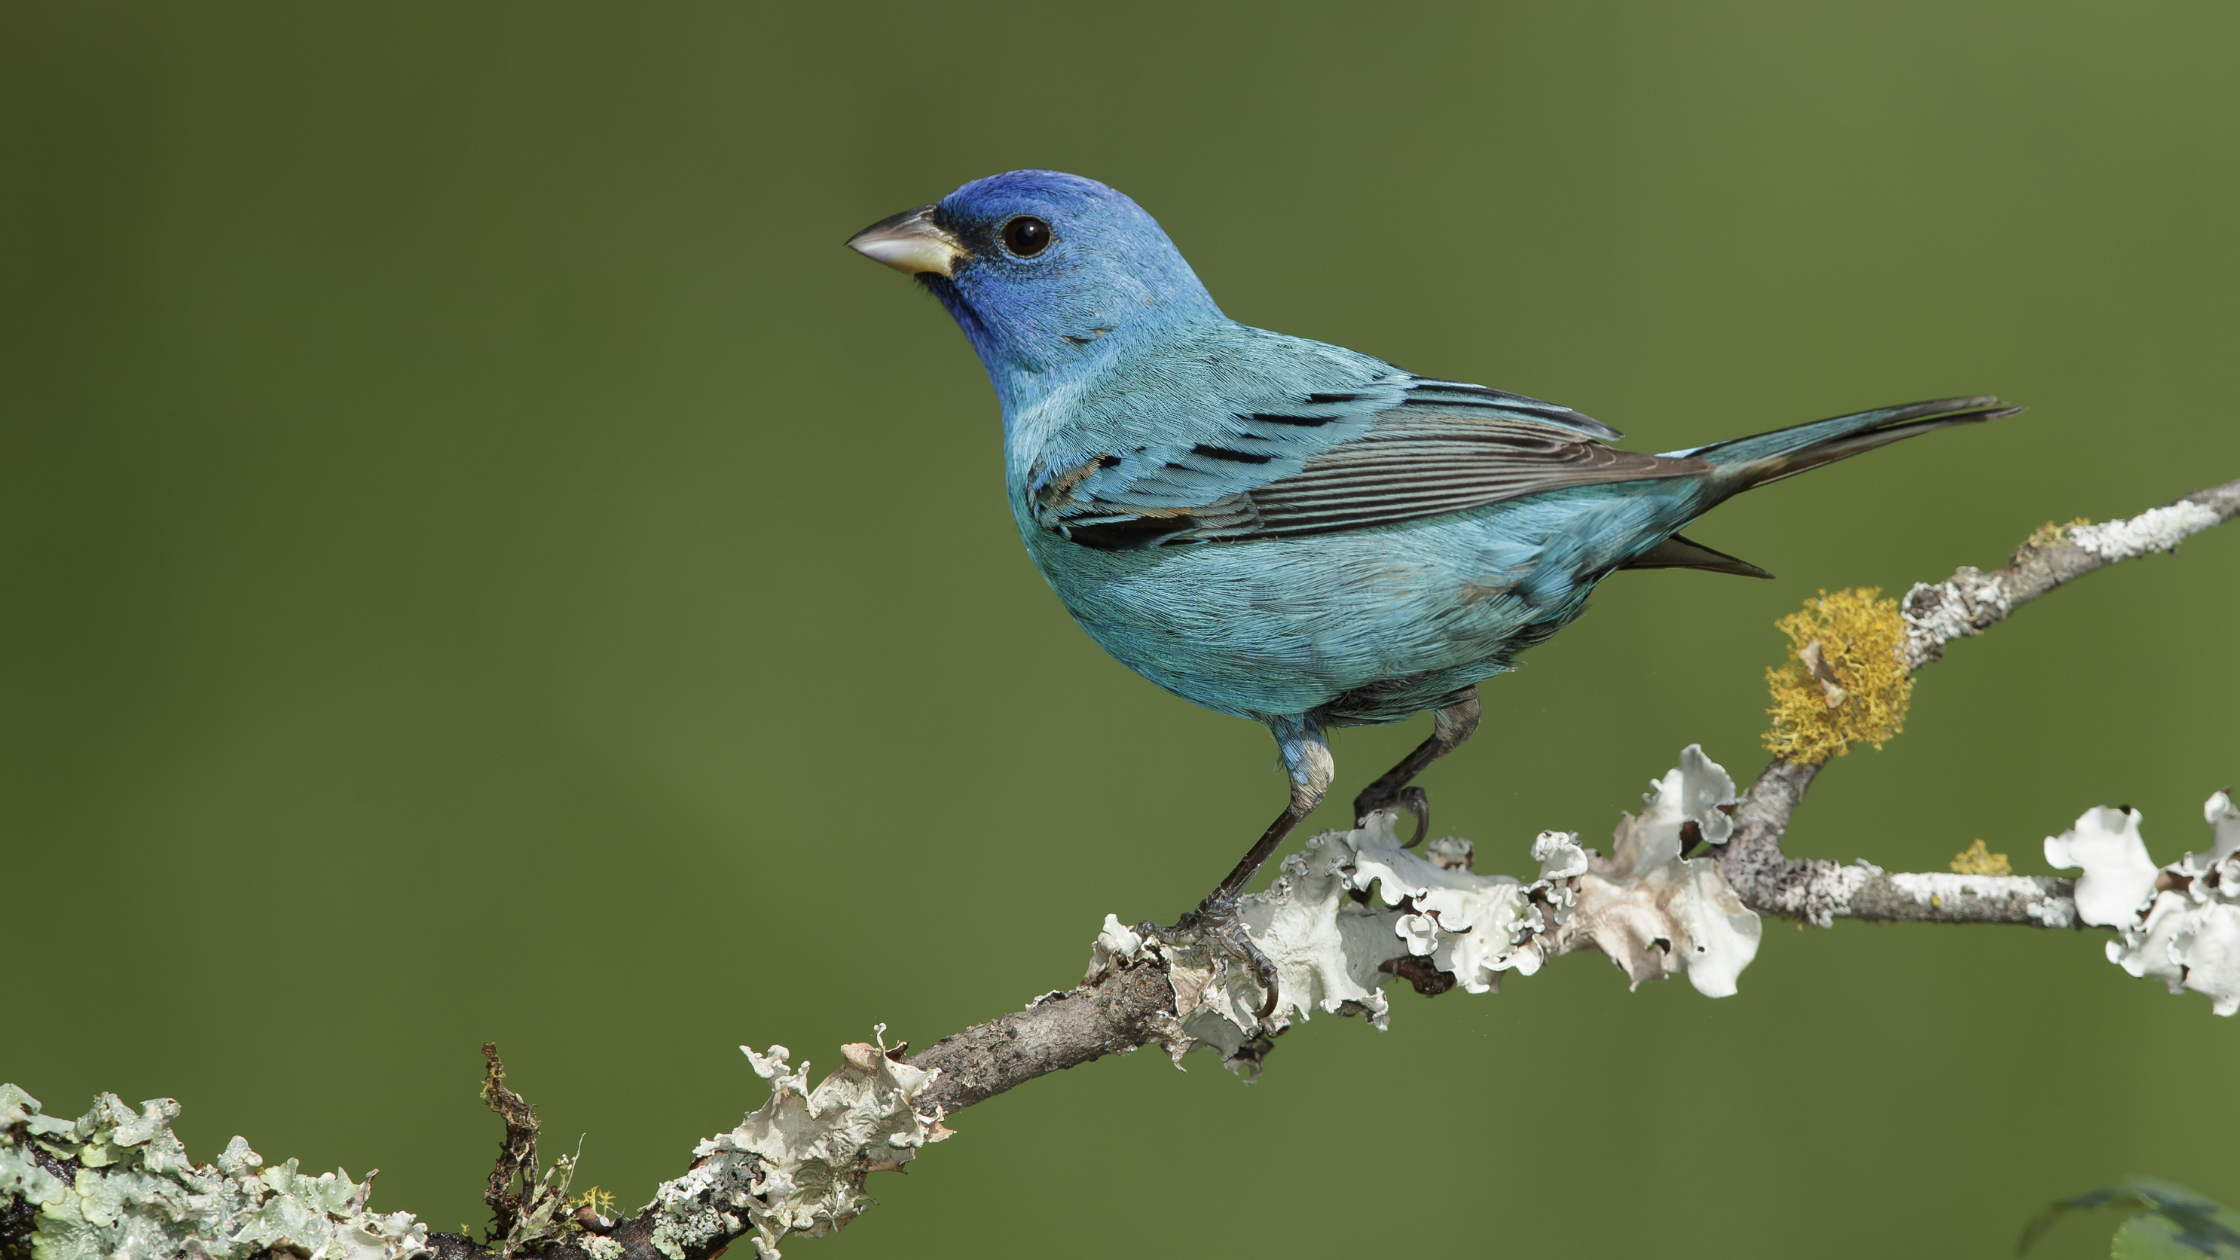 Blue-colored bird perched on tree branch